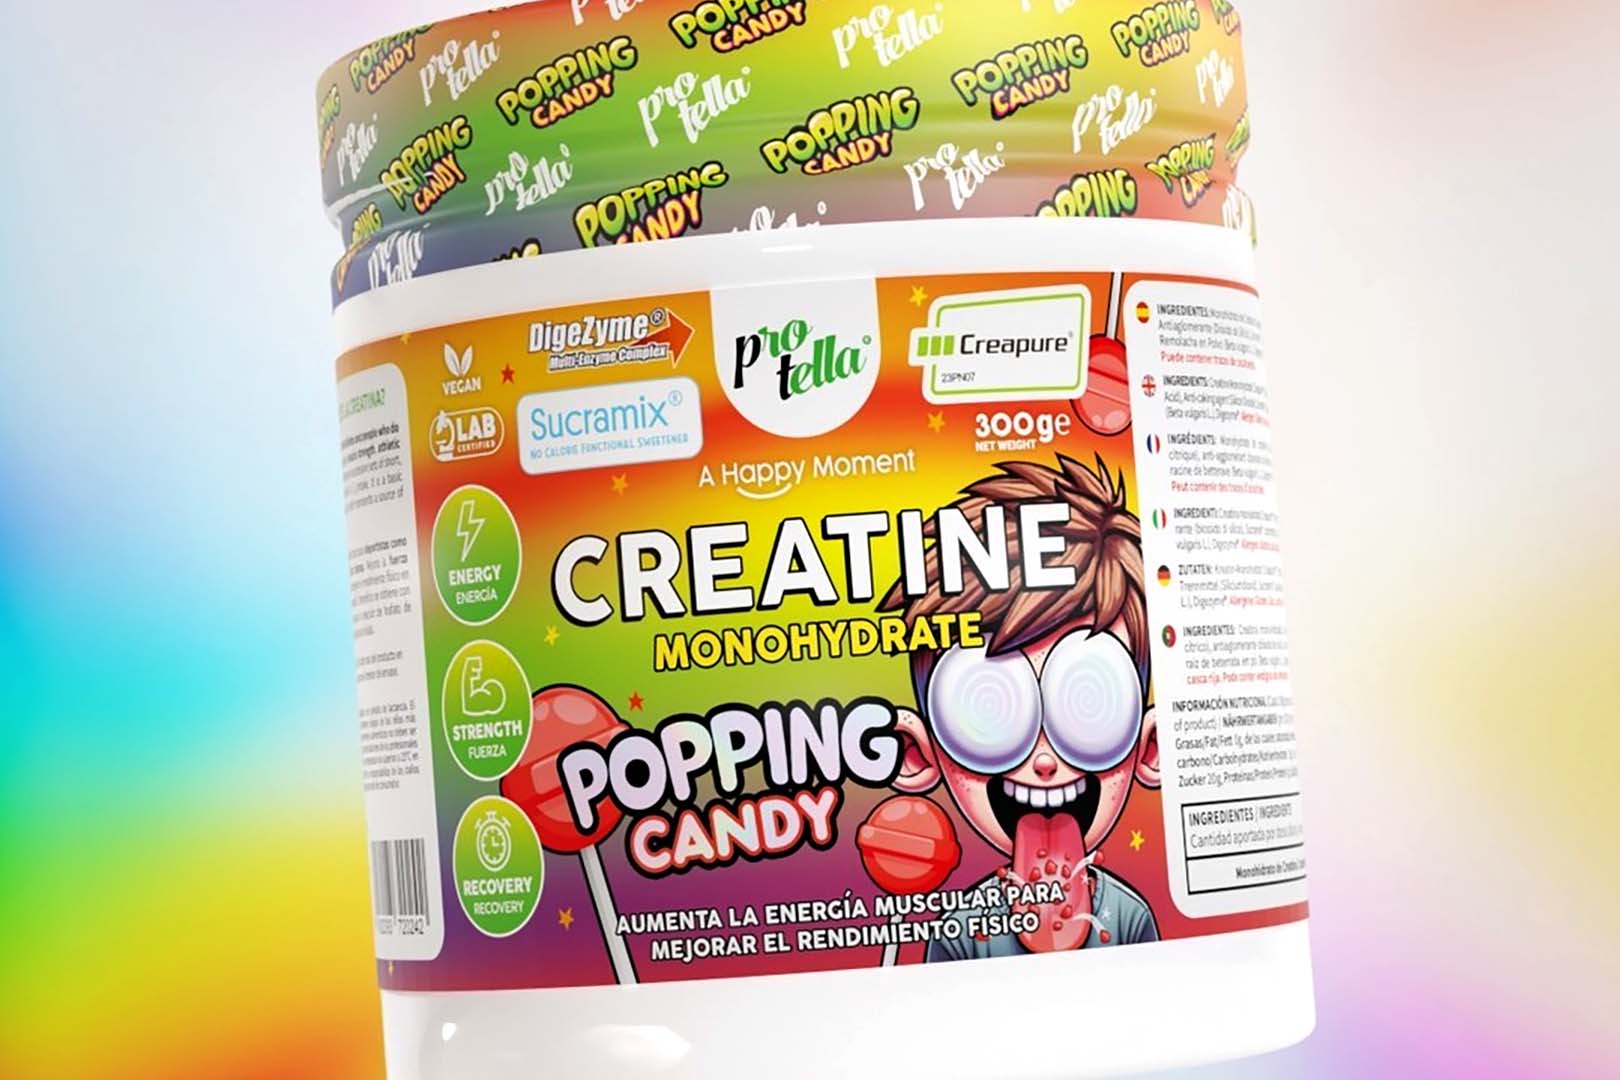 Protella Popping Candy Creatine